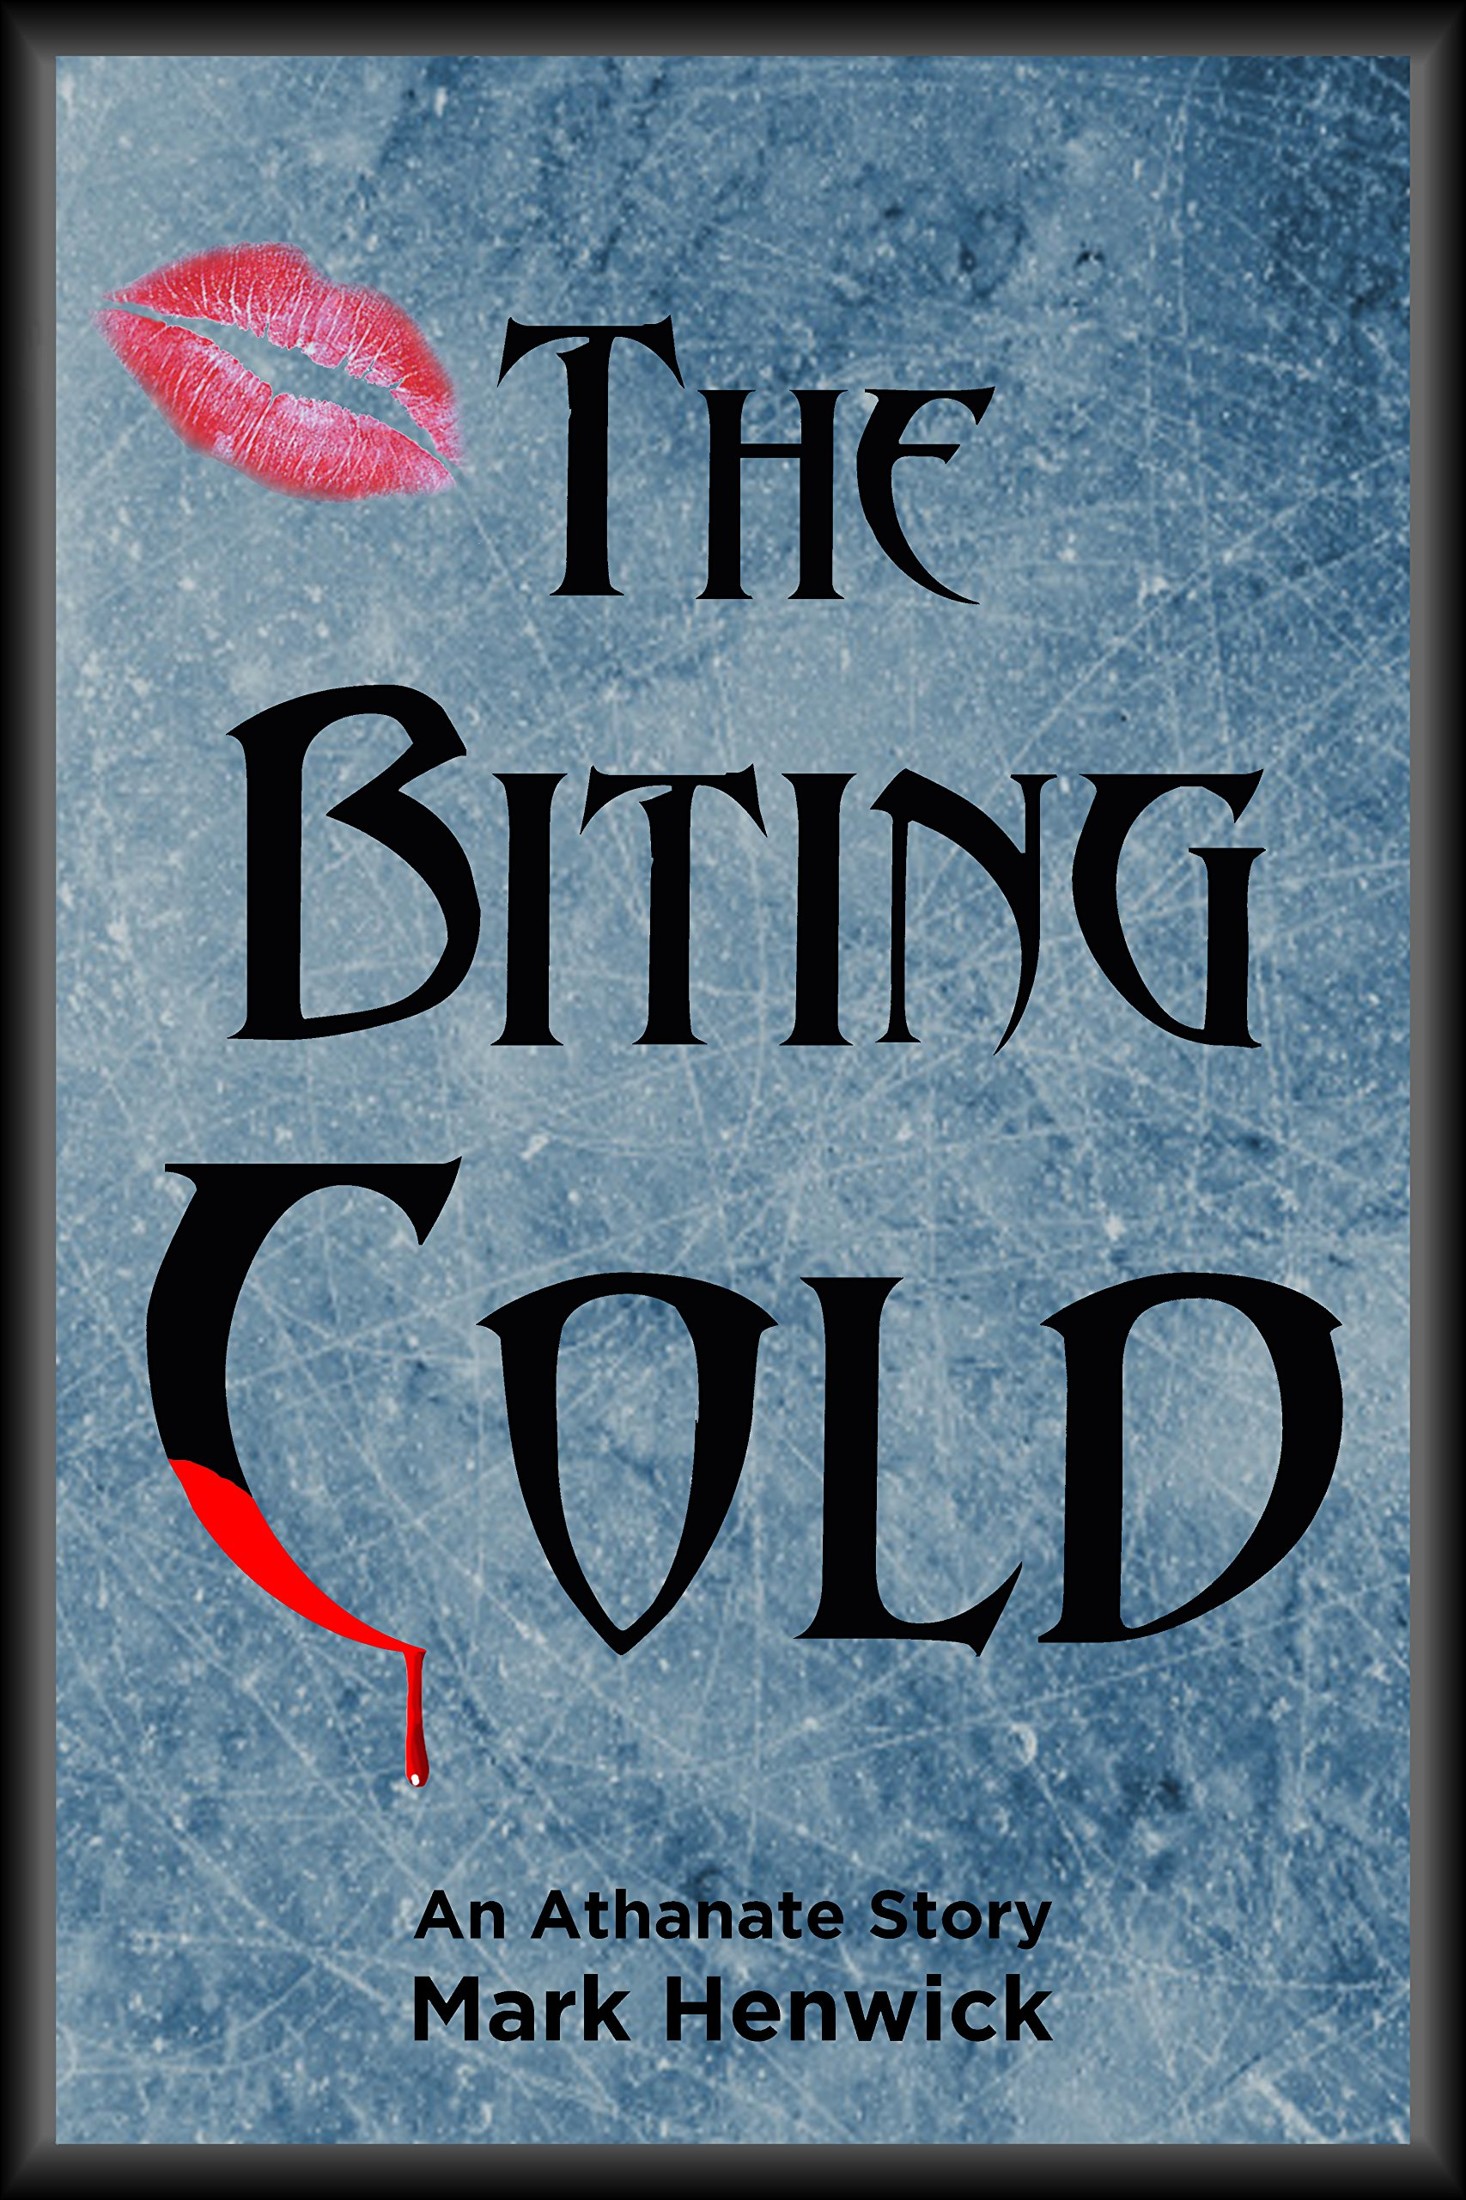 The Biting Cold: An Athanate Story